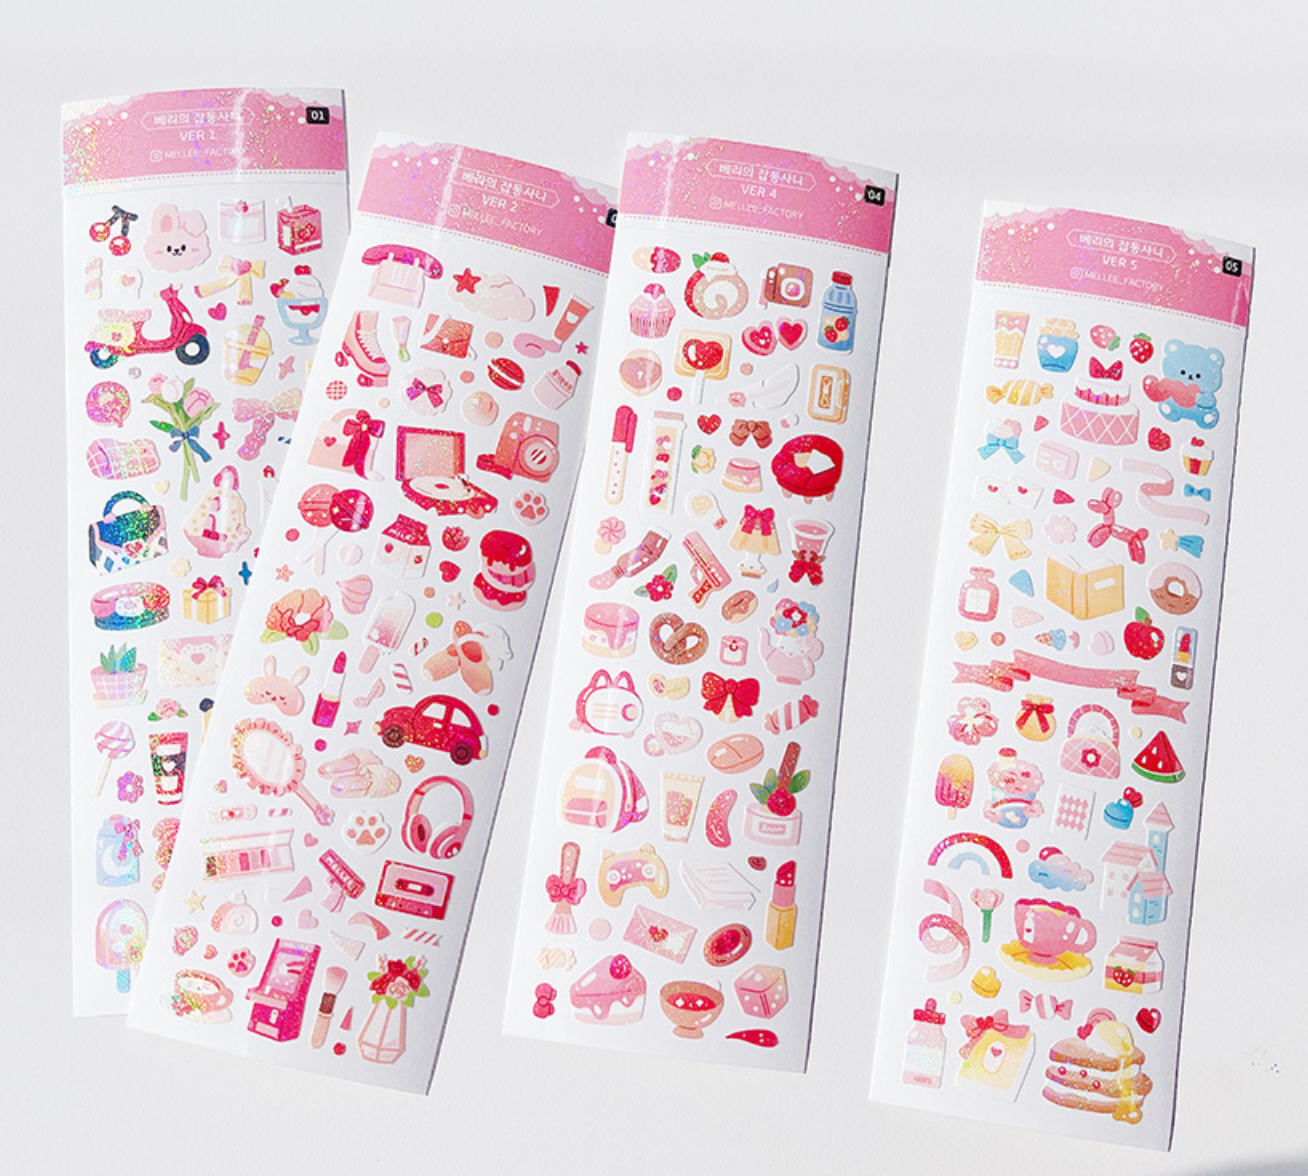 Mellee Factory sparkly objects sticker pack A764